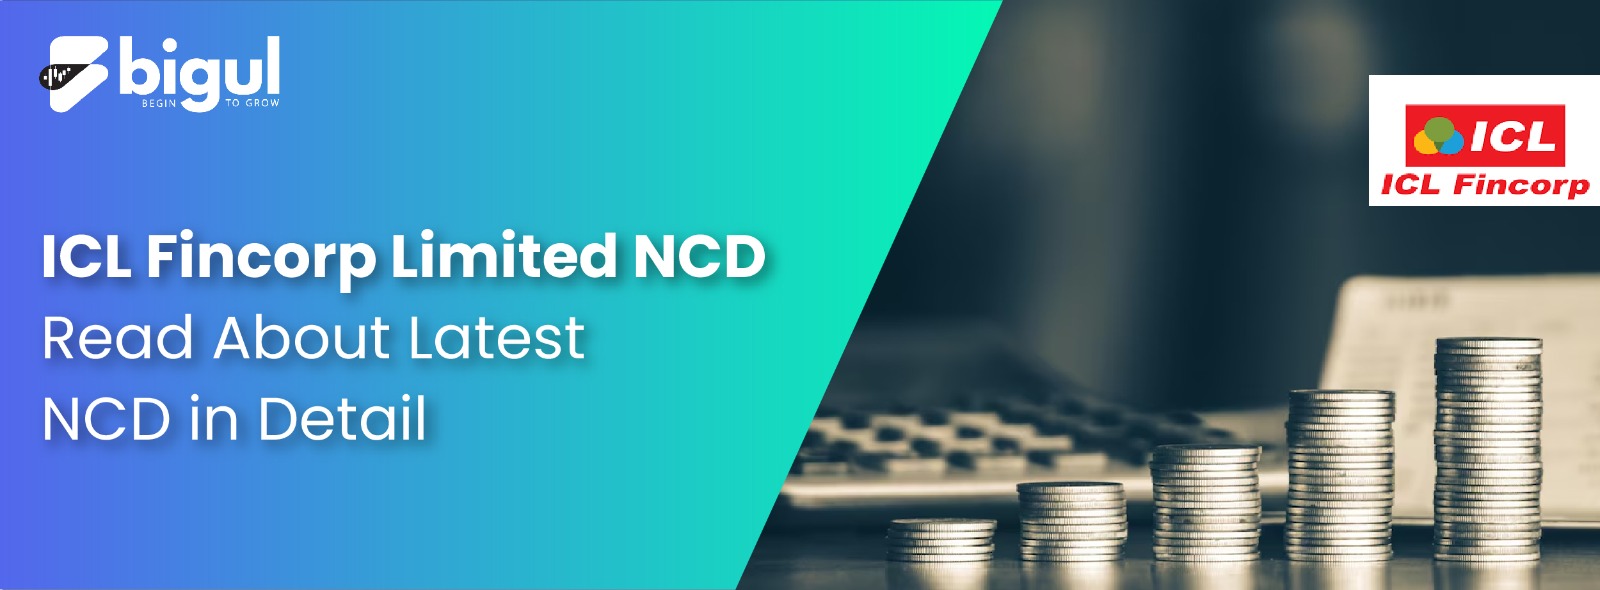 ICL Fincorp Limited NCD: Read About Latest NCD in Detail